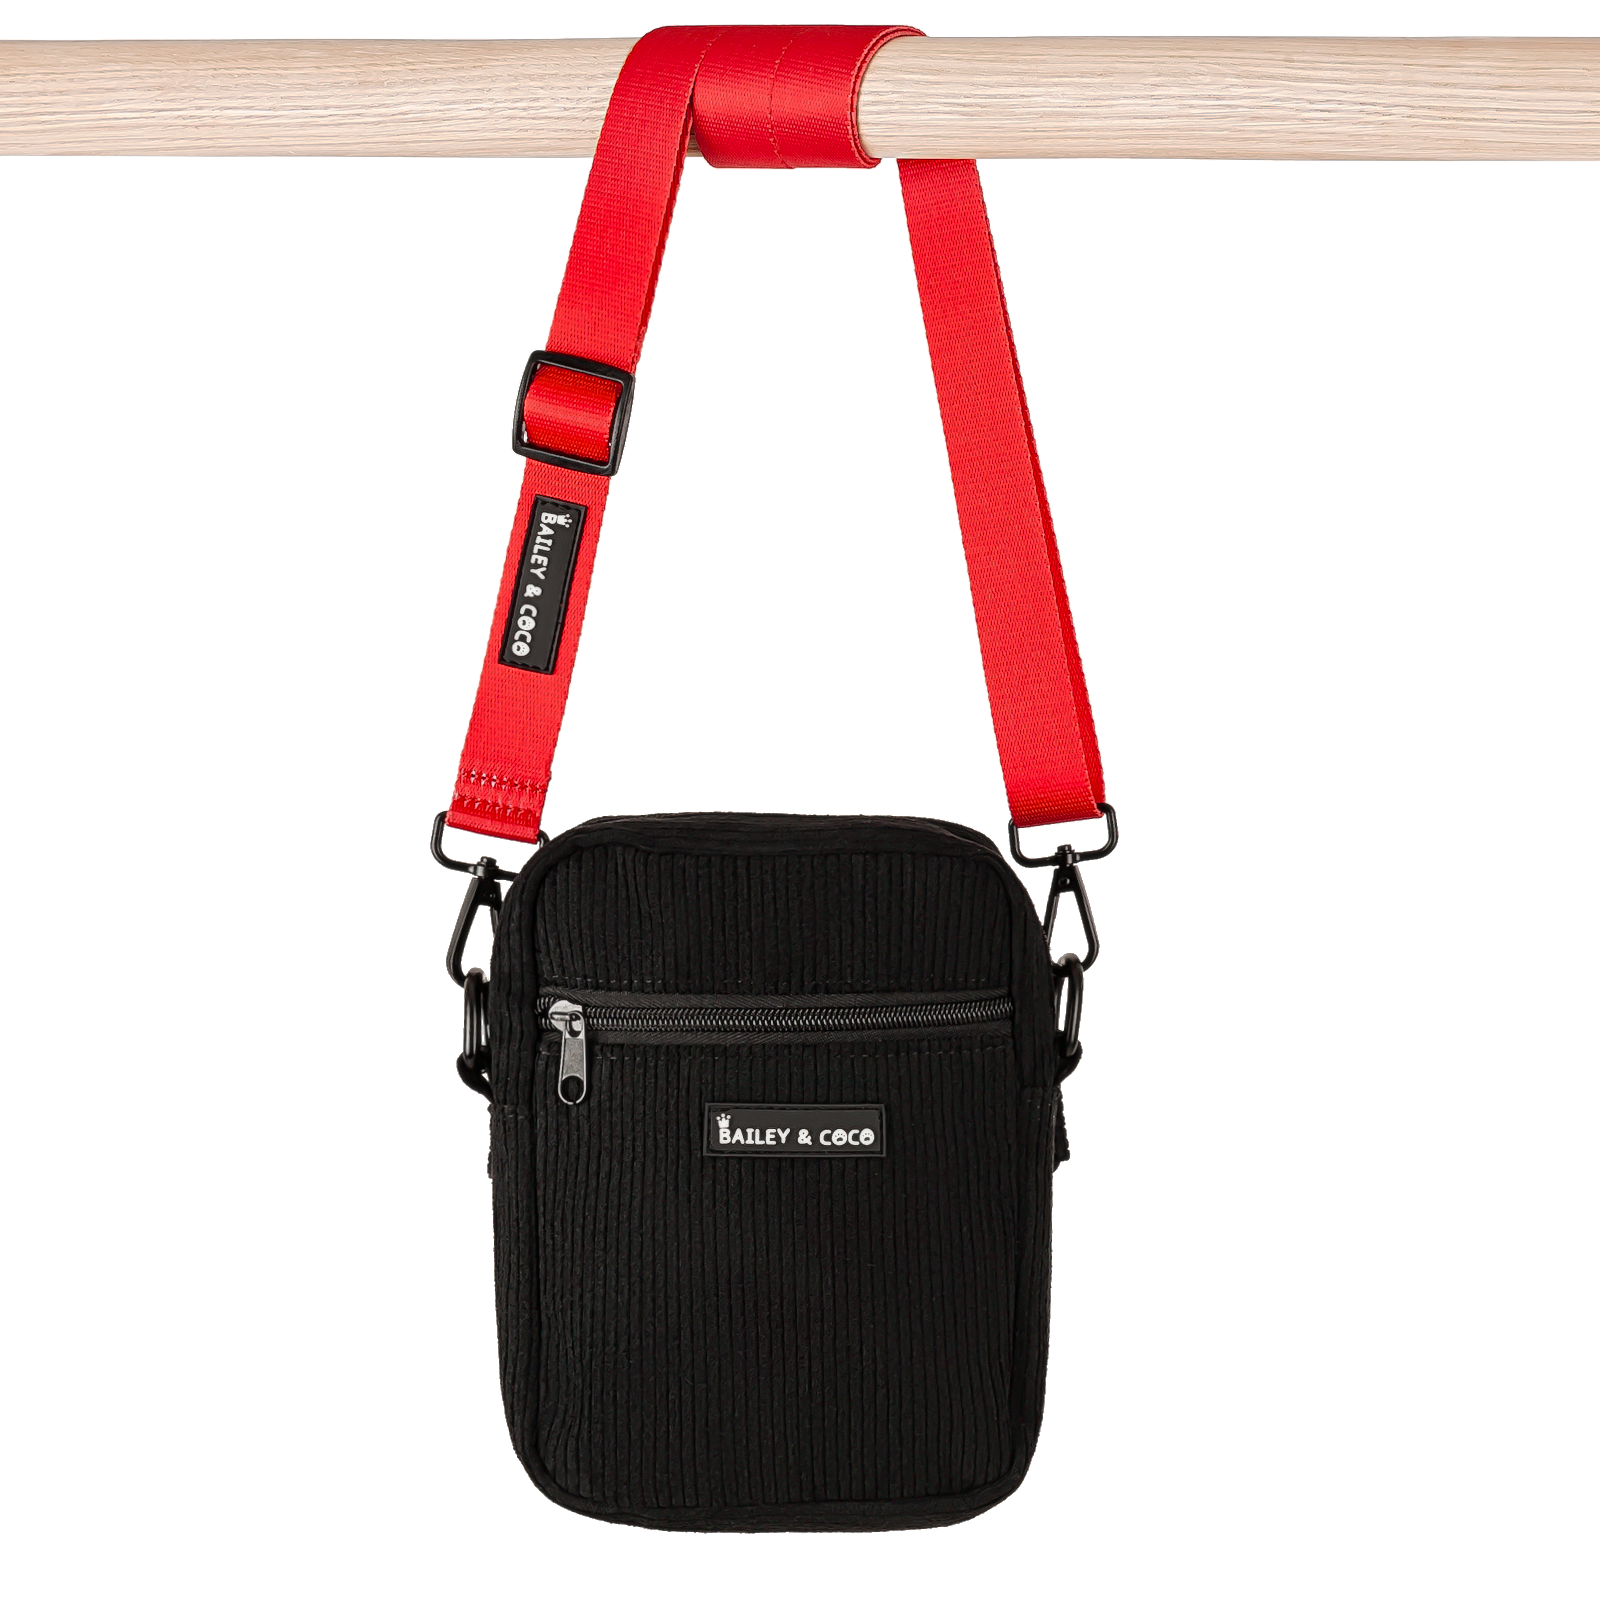 Dog Walking Bag With Red One Strap - Black.